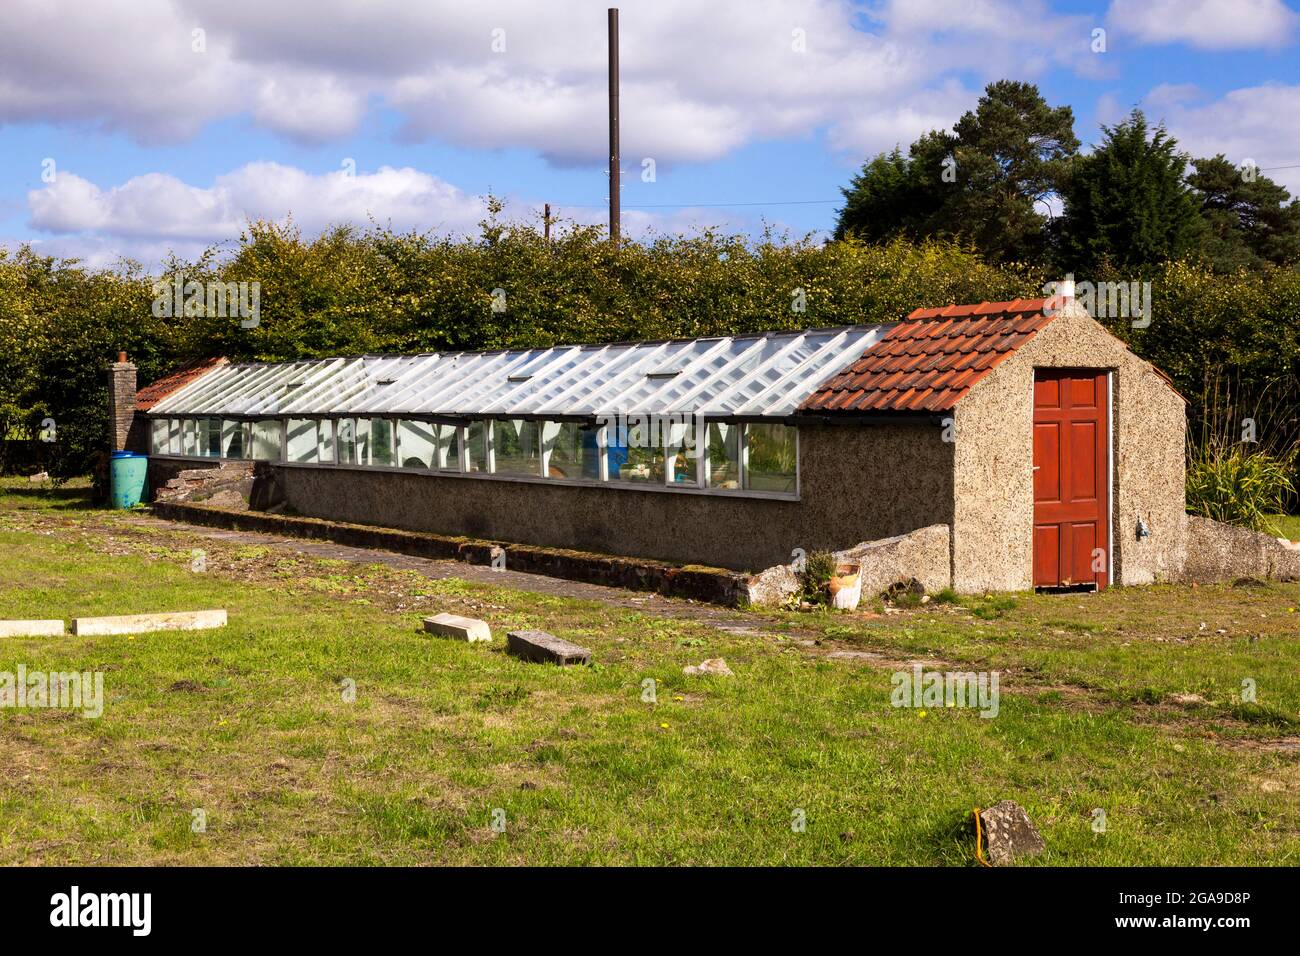 An old heated greenhouse in the village of Goathland, North Yorkshire, England, U.K. Stock Photo